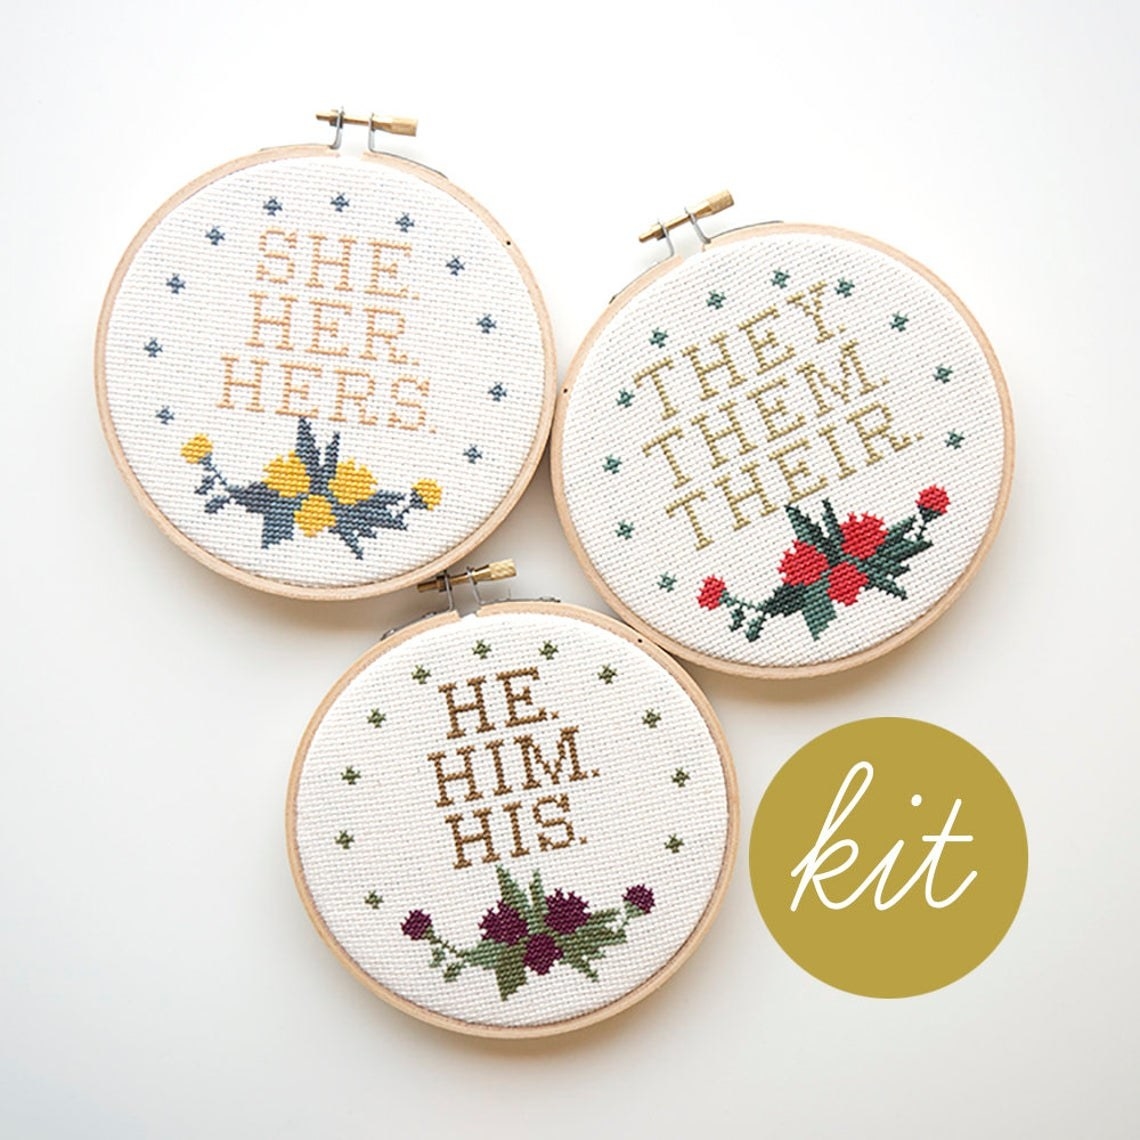 Three floral embroidery hoops, each with different pronouns. 